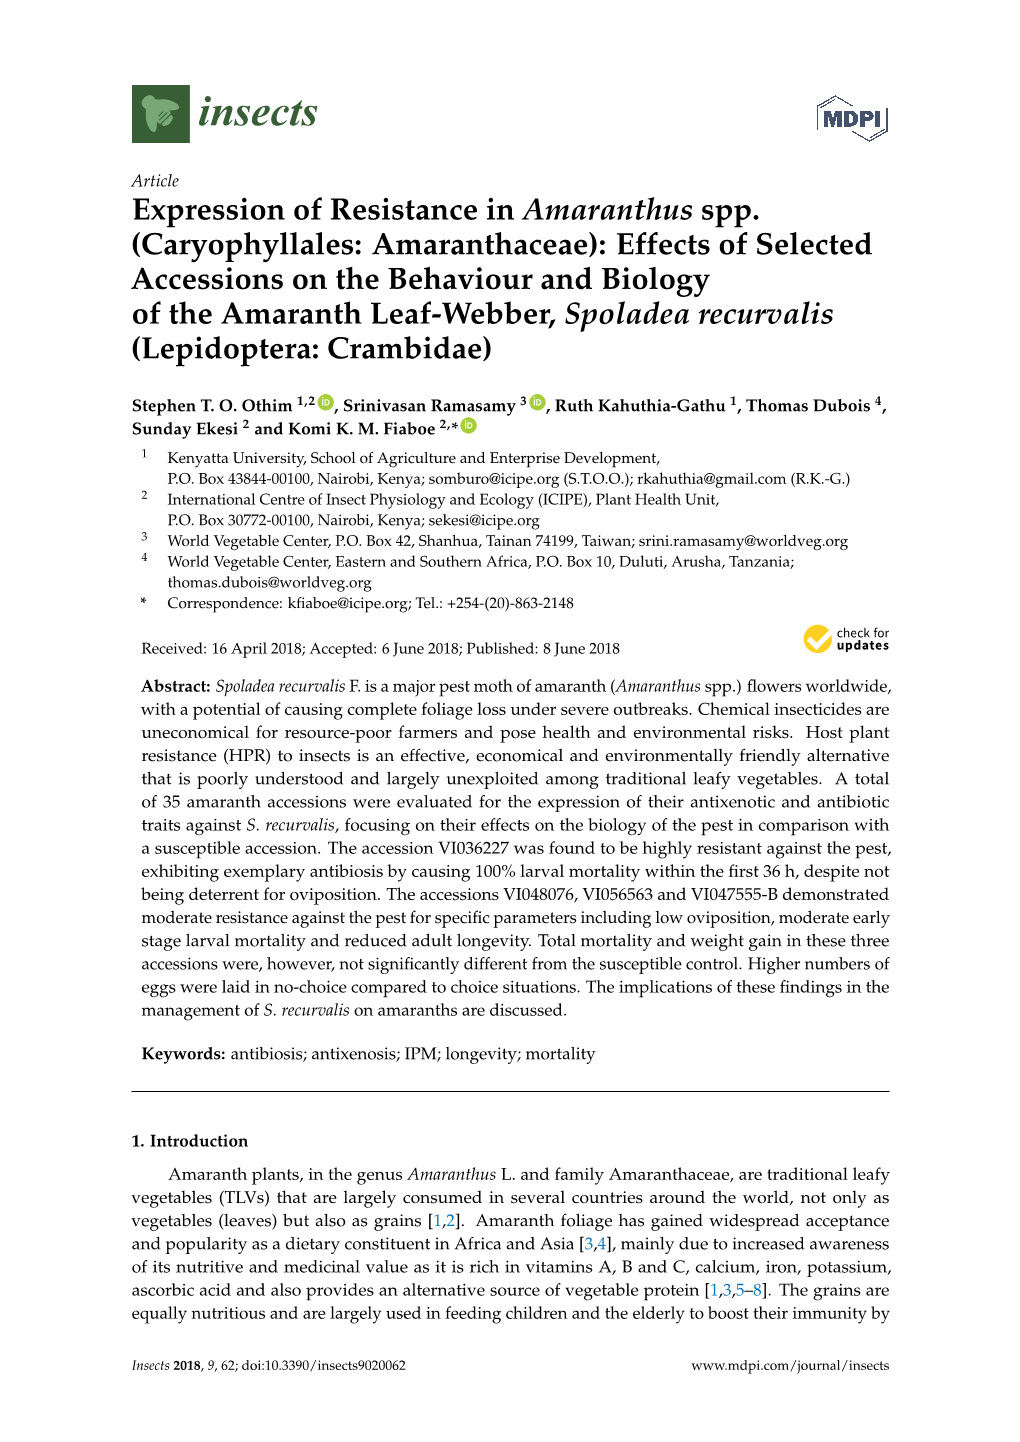 Expression of Resistance in Amaranthus Spp.(Caryophyllales